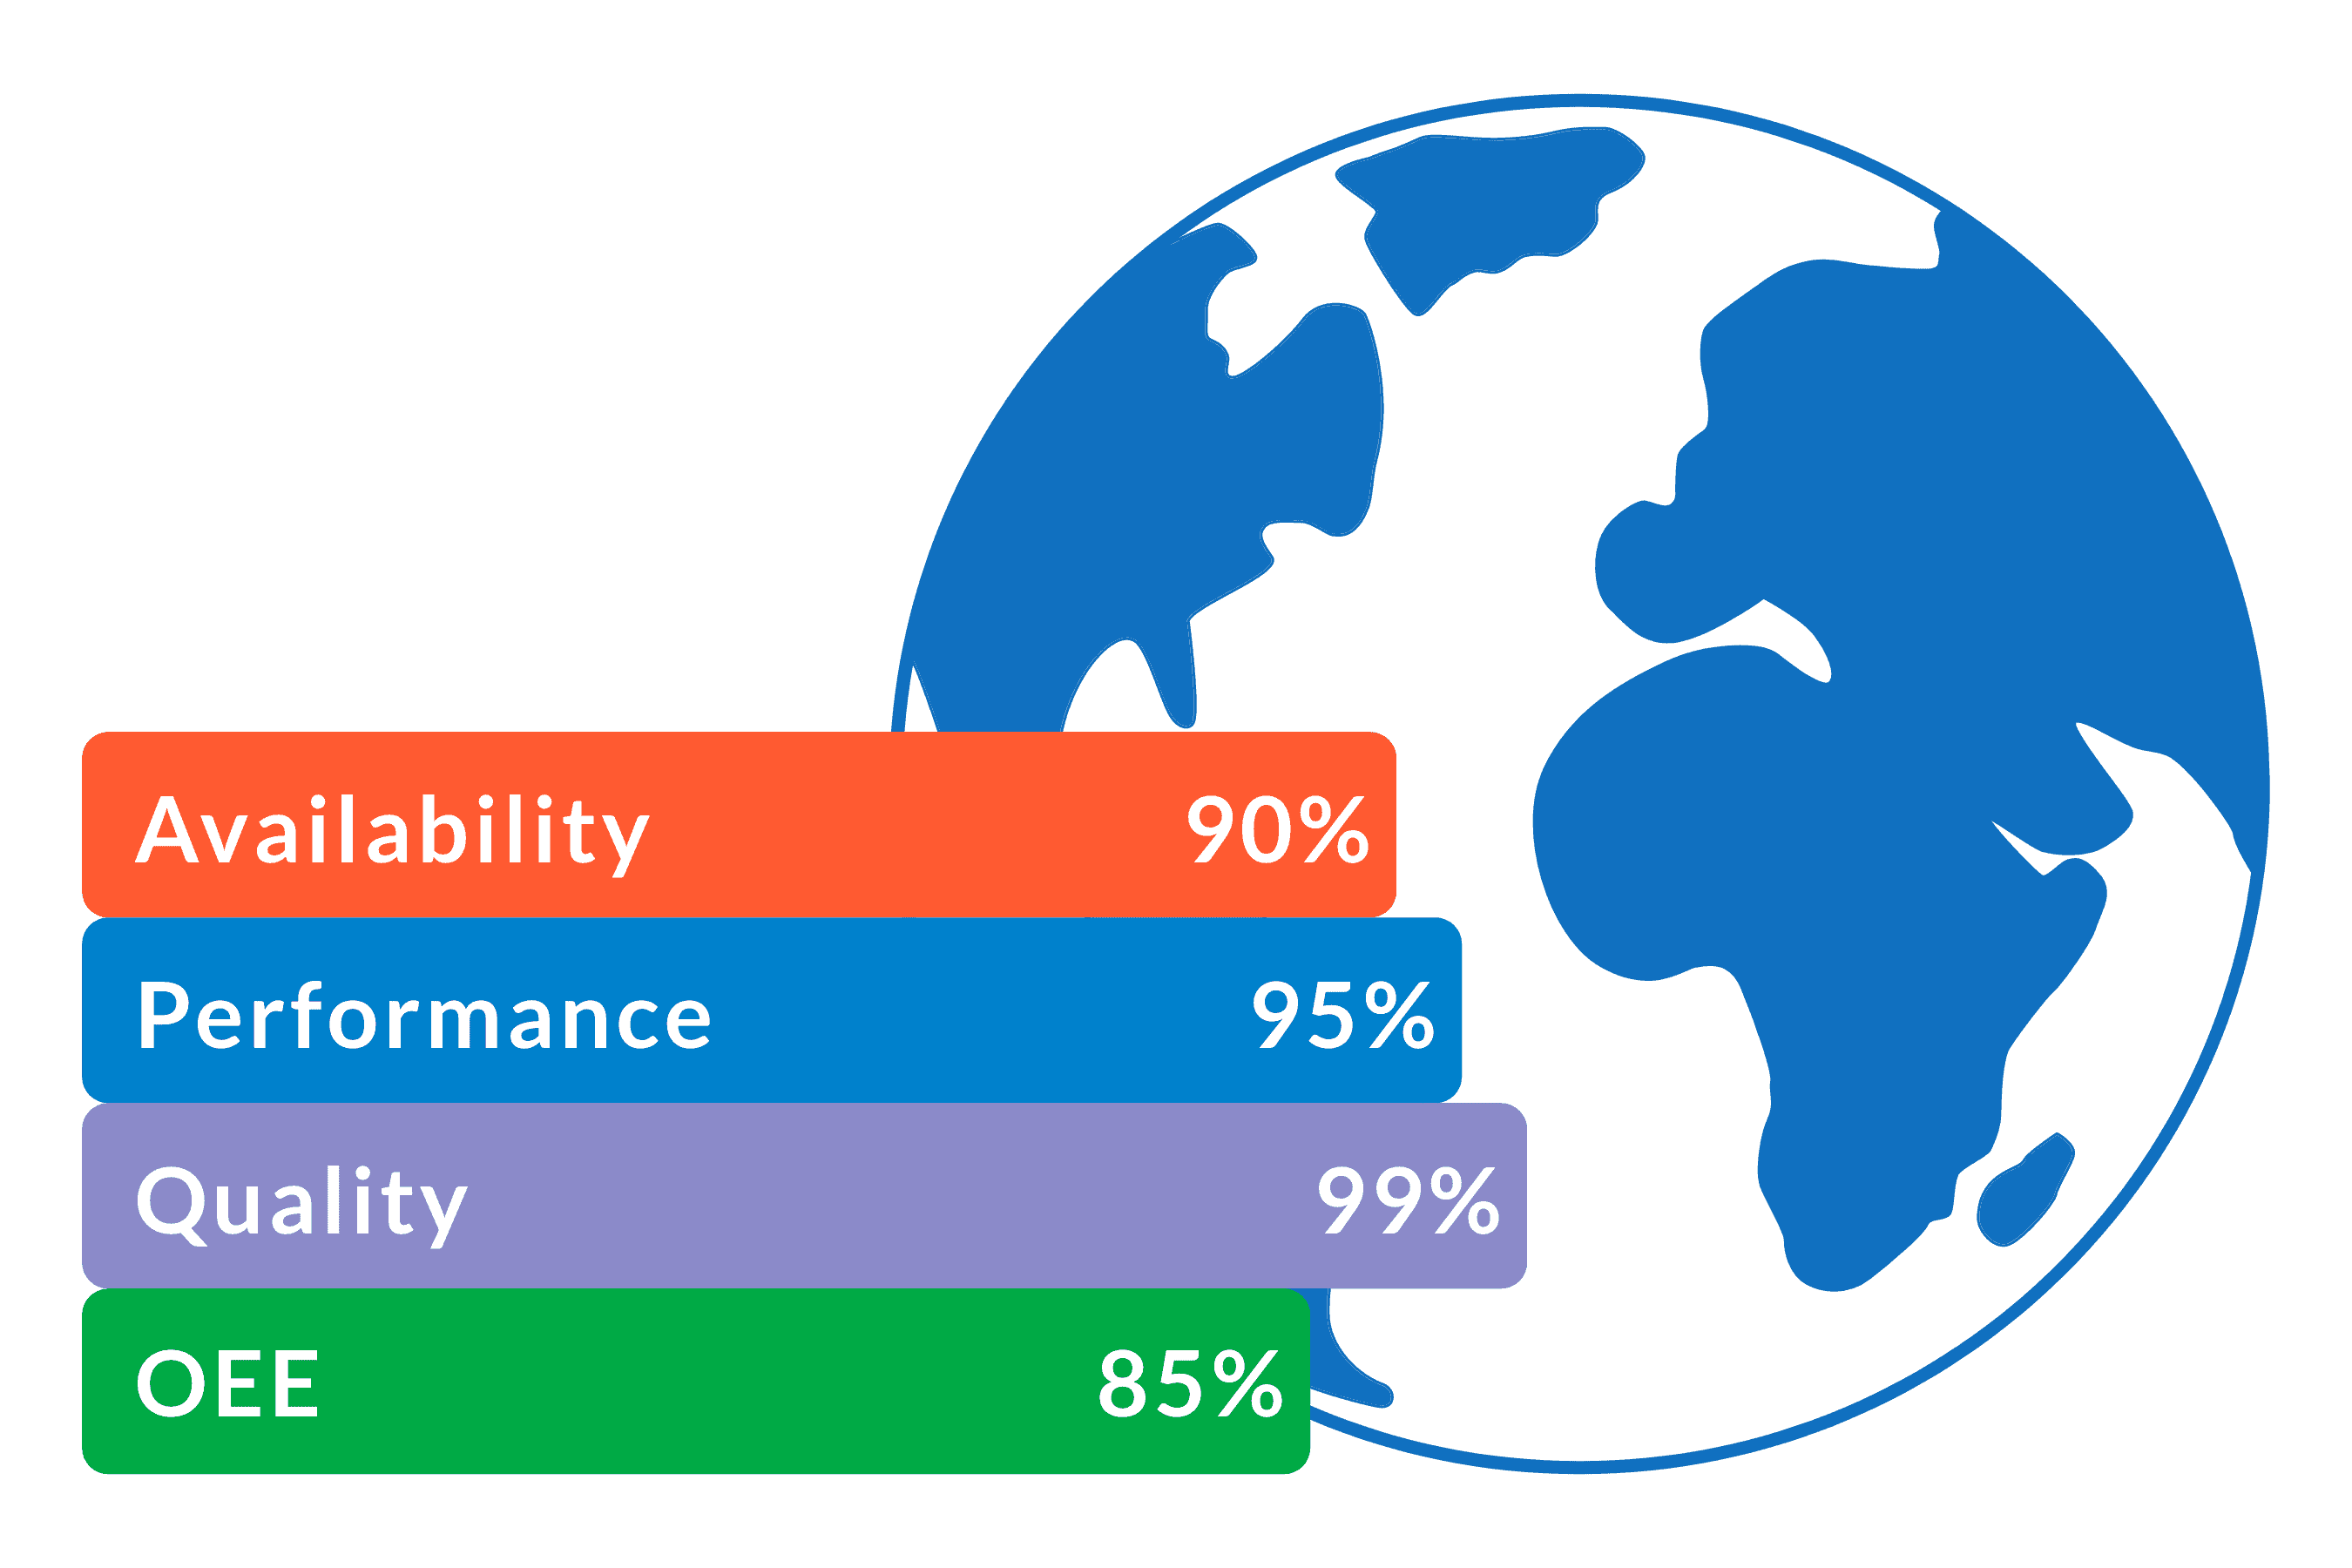 85% OEE is often referred to as World-Class and is based on having 90% Availability, 95% Performance, and 99% Quality.